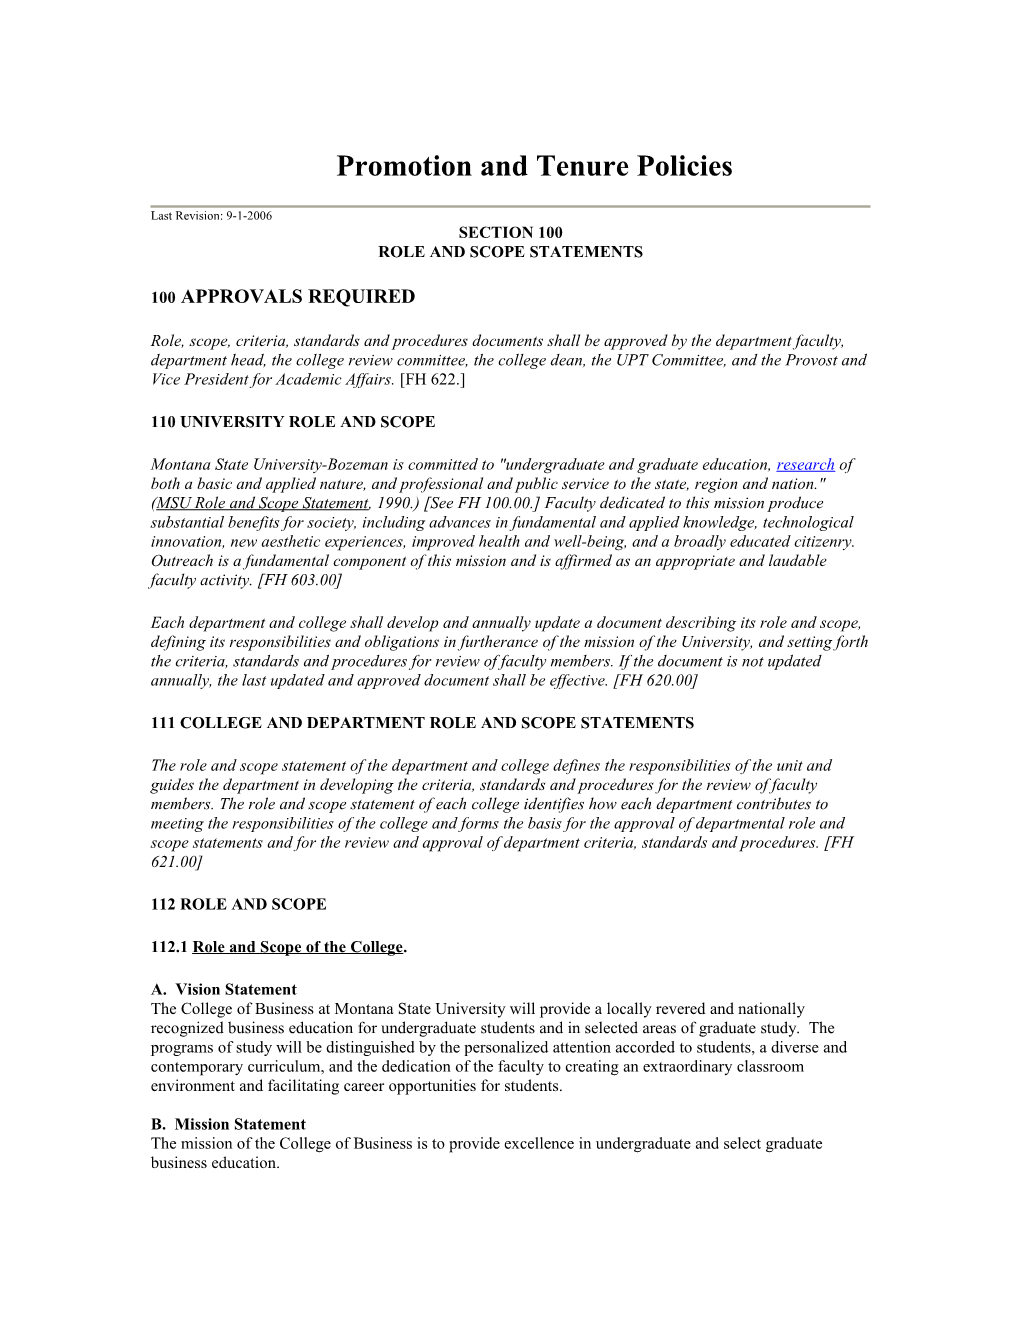 Spring 2006 Changes Incorporated – Awaiting University Approval